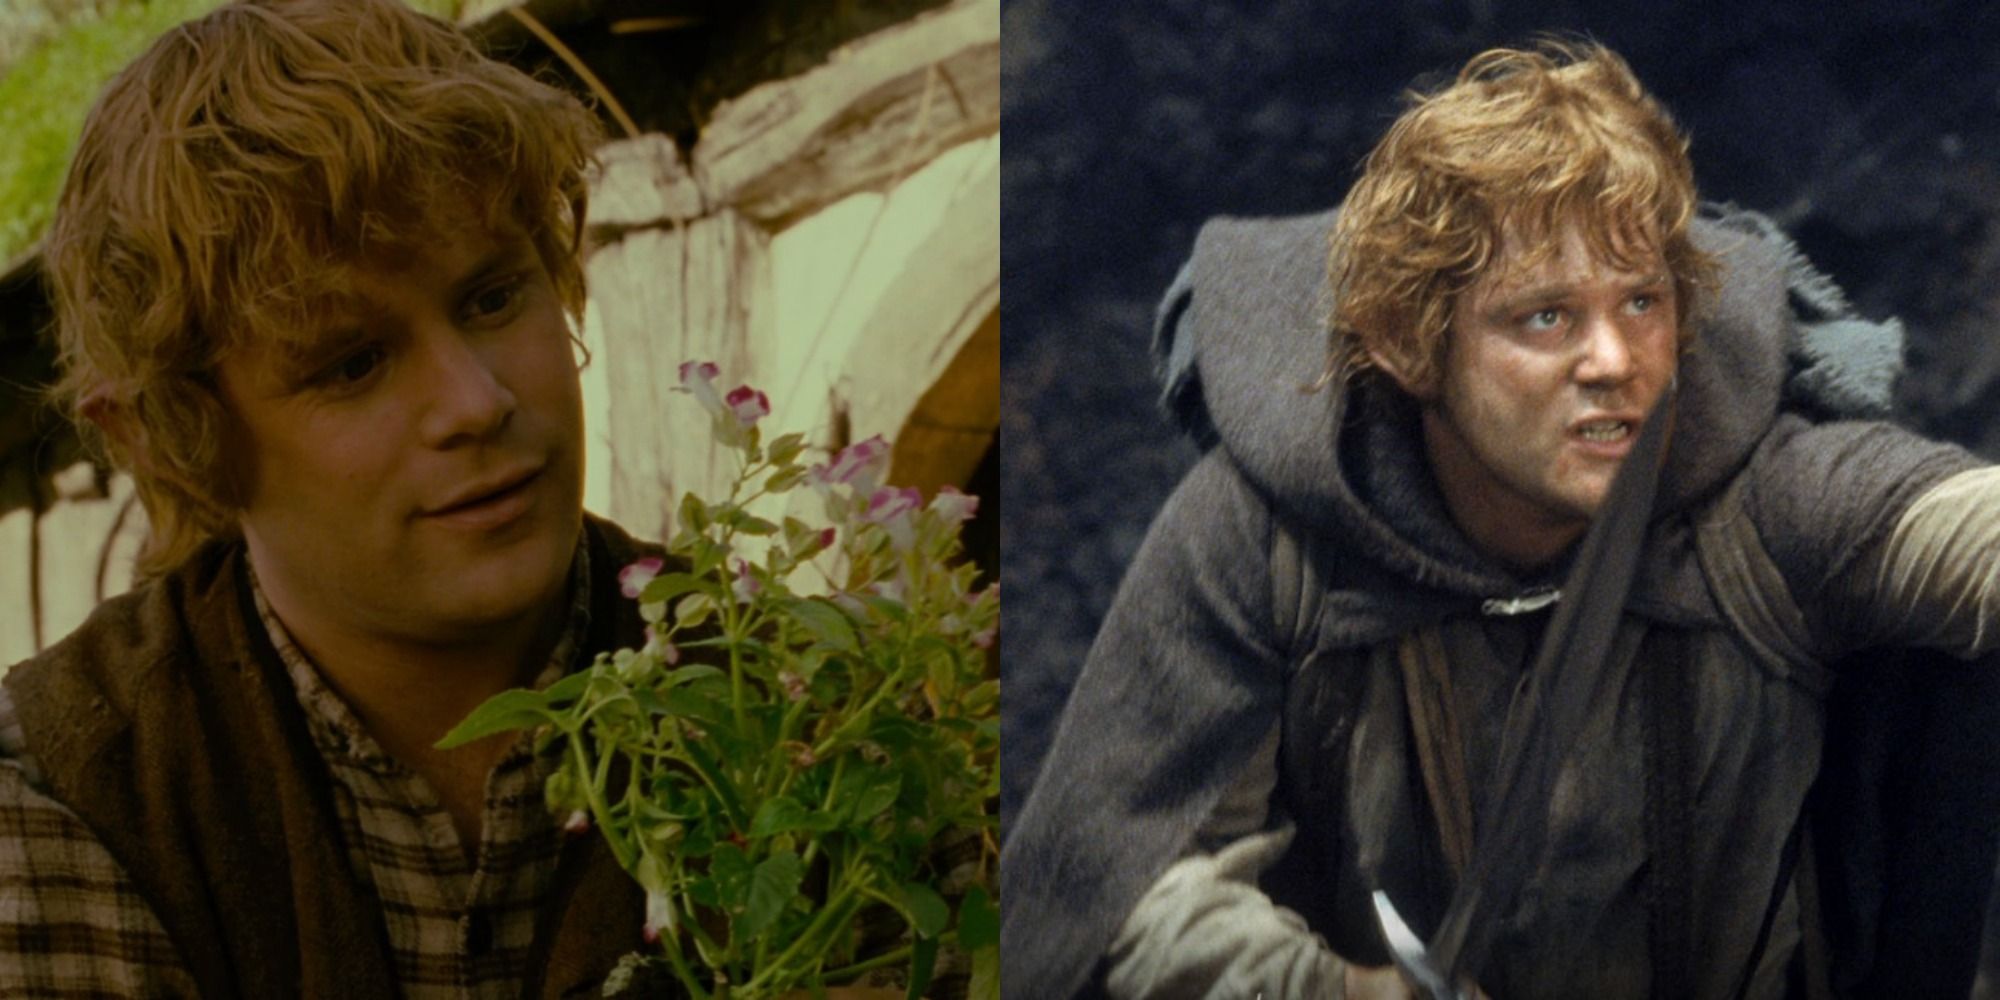 The wisdom of Samwise Gamgee | Lord of the rings, Samwise gamgee, The hobbit